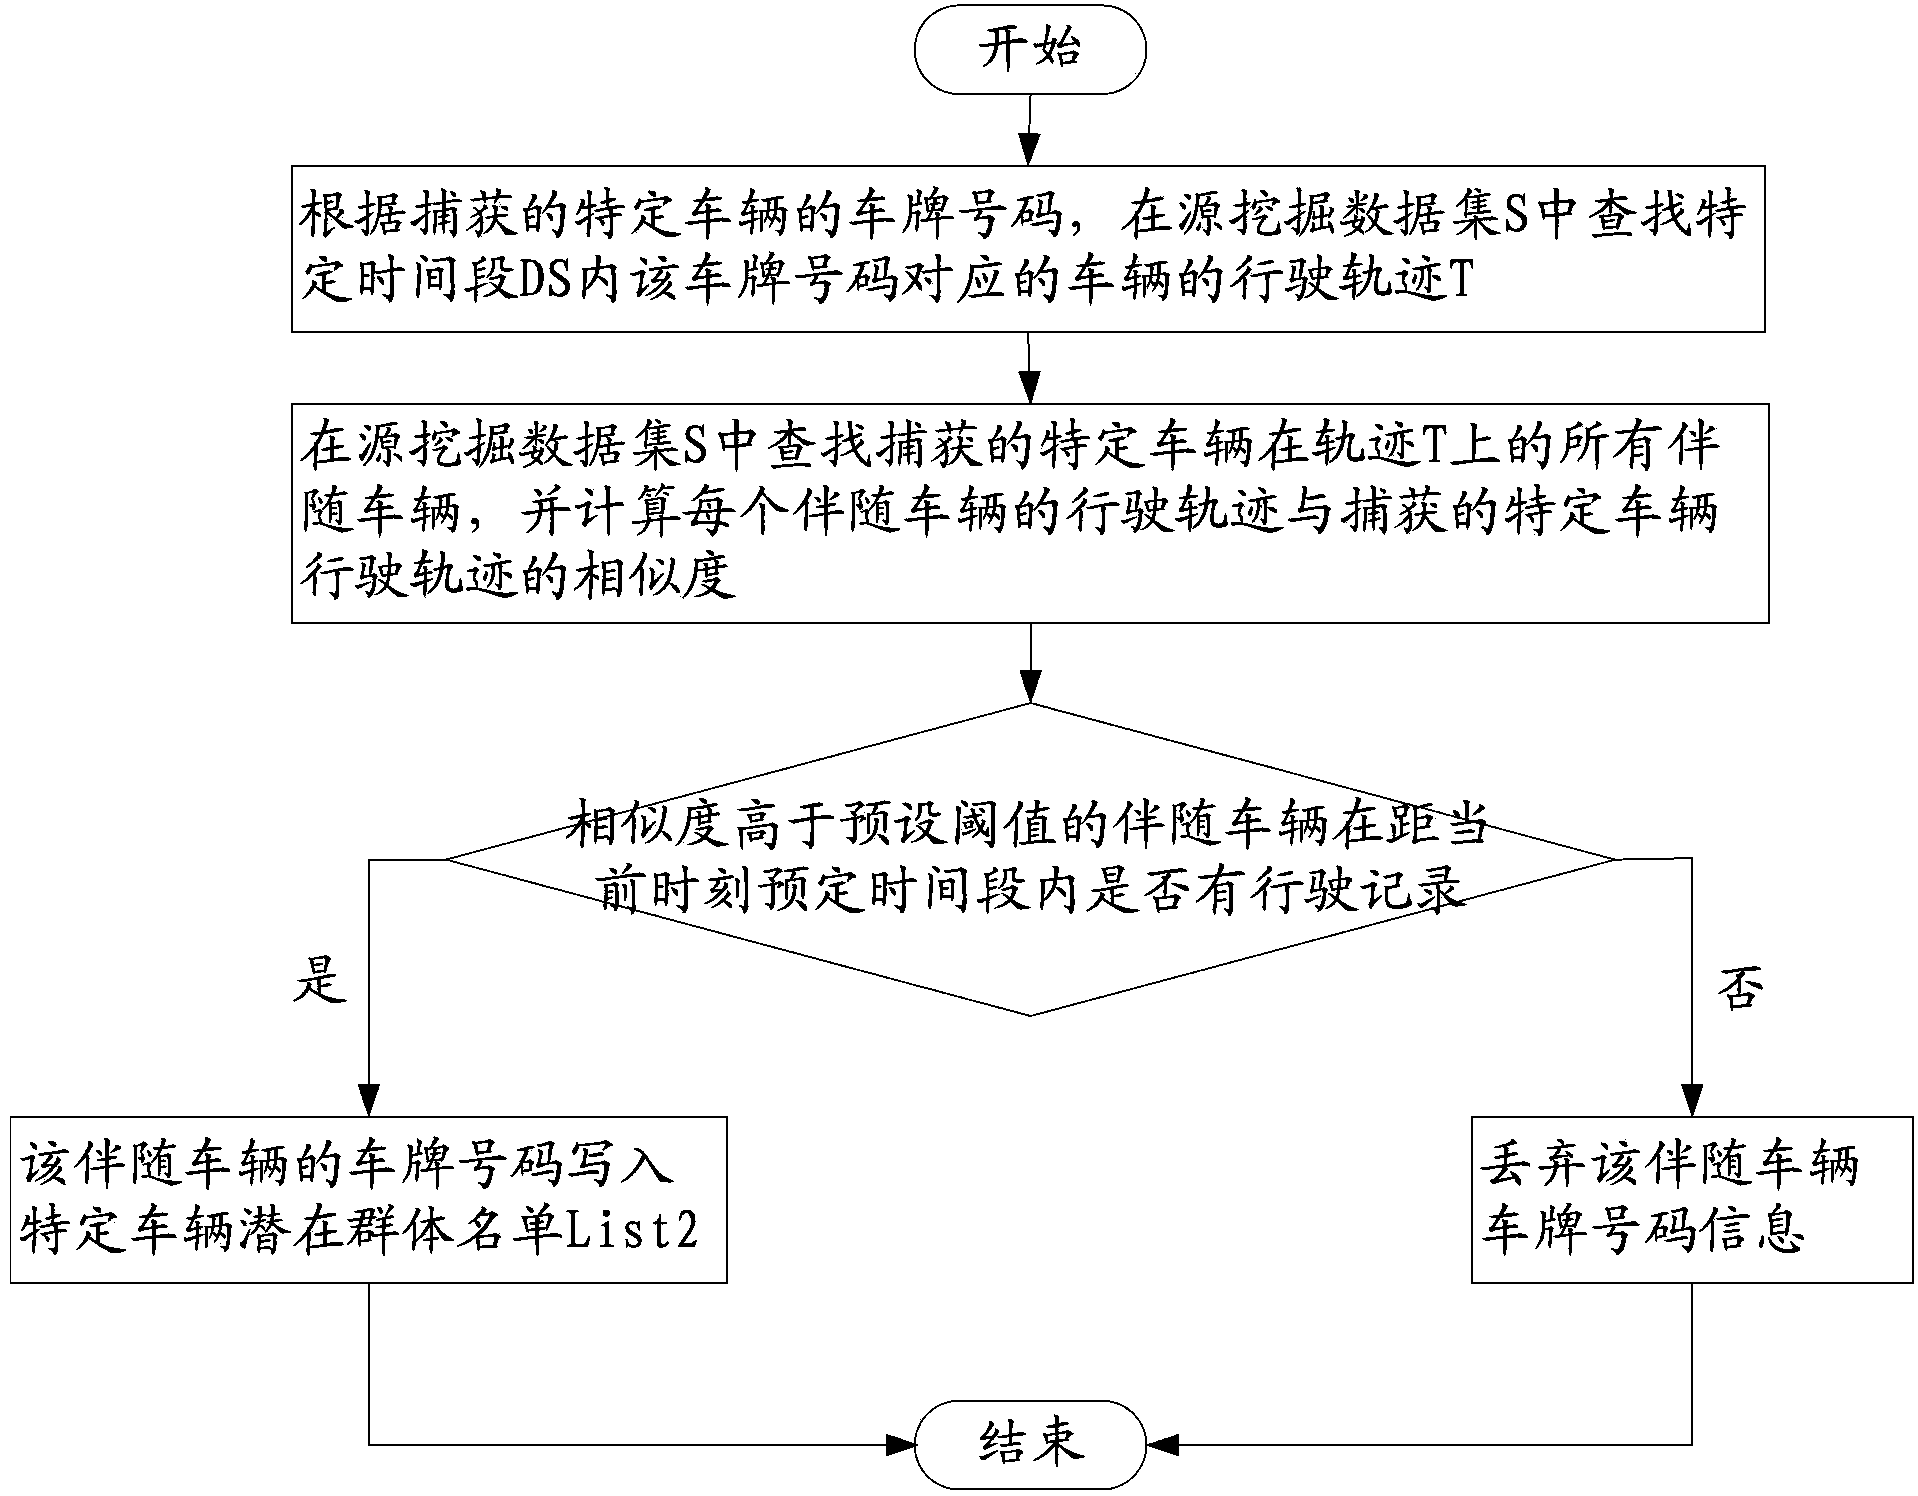 Running track prediction method aiming at specific vehicle potential group